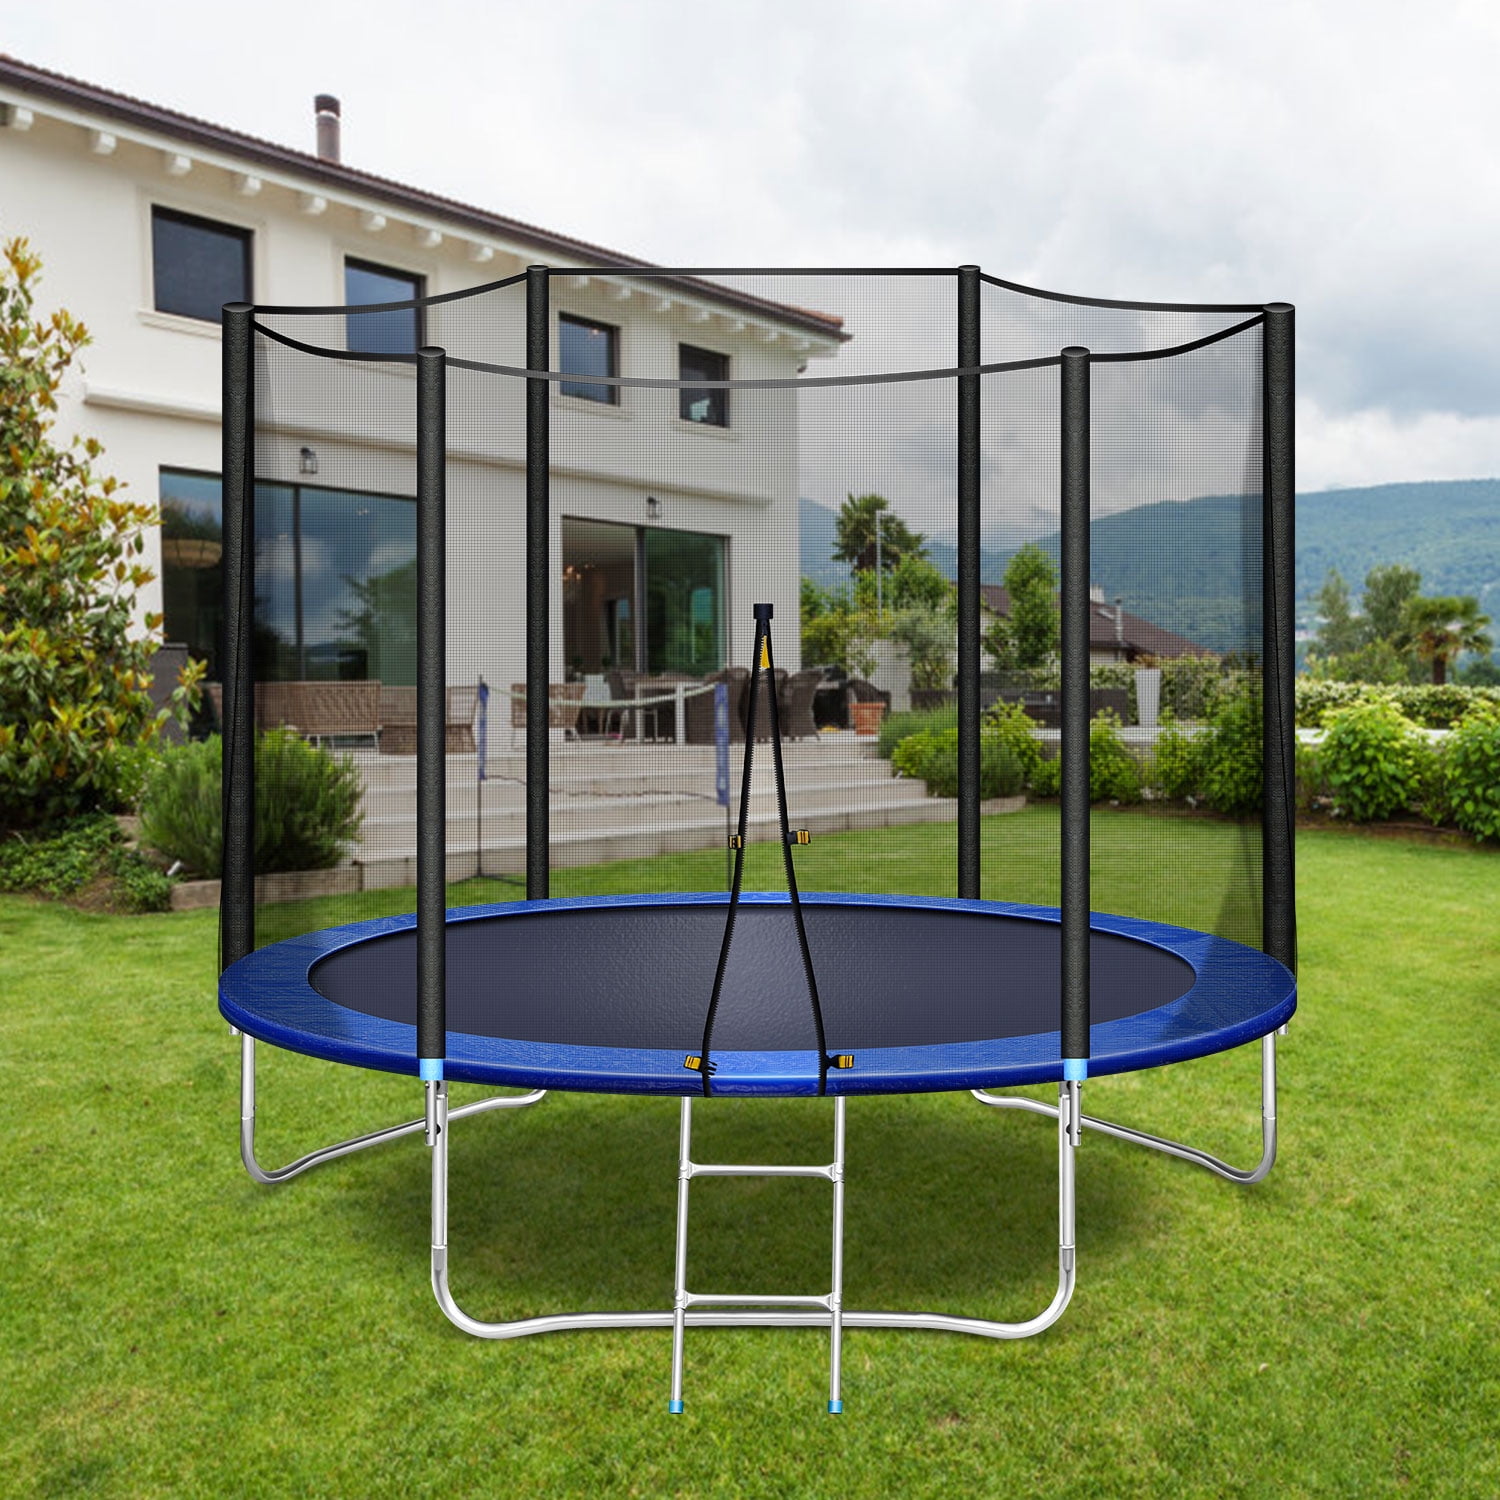 5' Backyard Trampoline W/ Safety Enclosure Kids Play Jump Outdoor Yard Fitness 